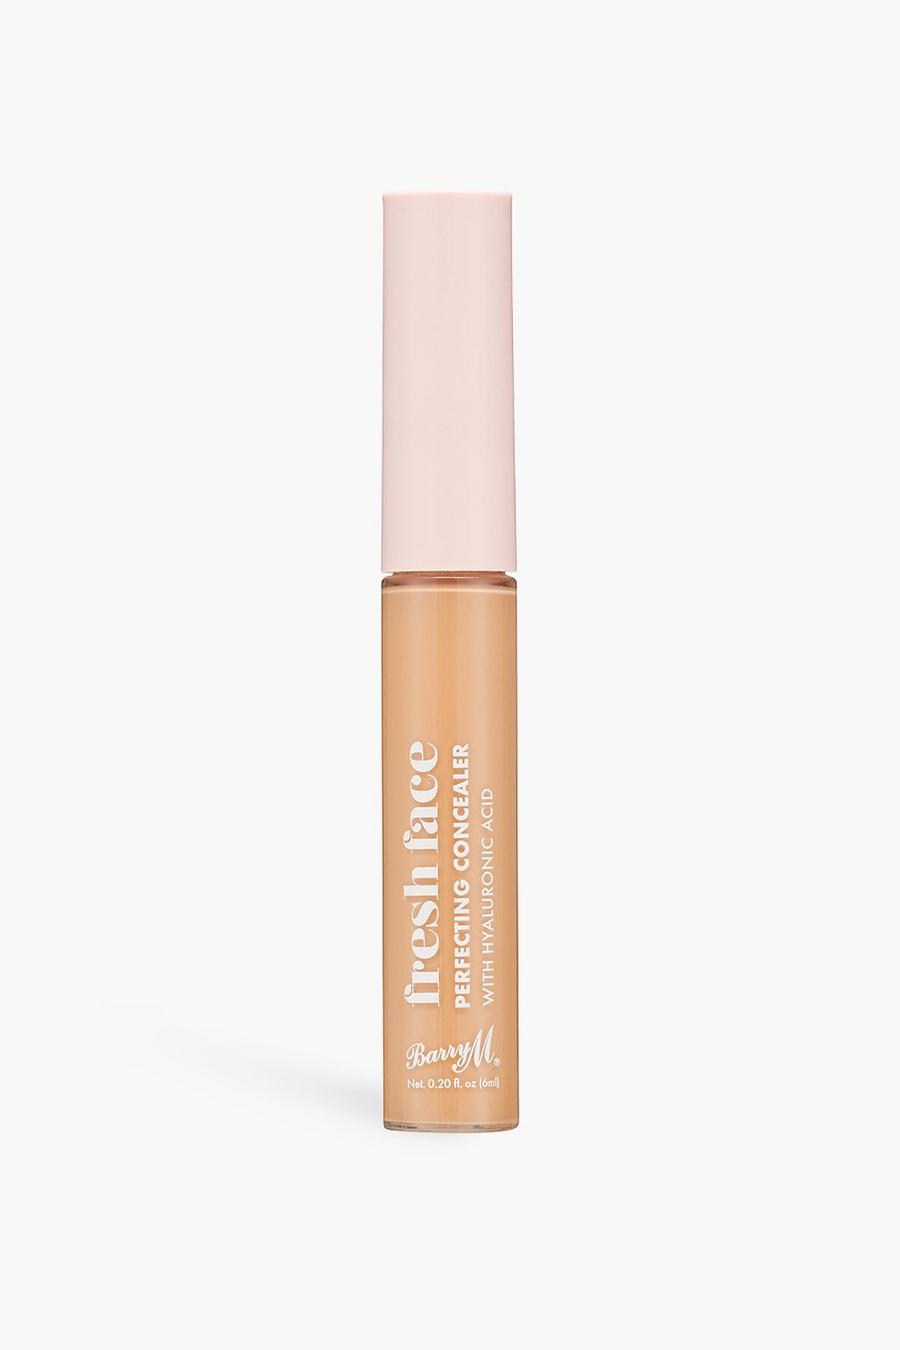 Barry M - Correttore Fresh Face Perfecting Concealer 7, Tan marrón